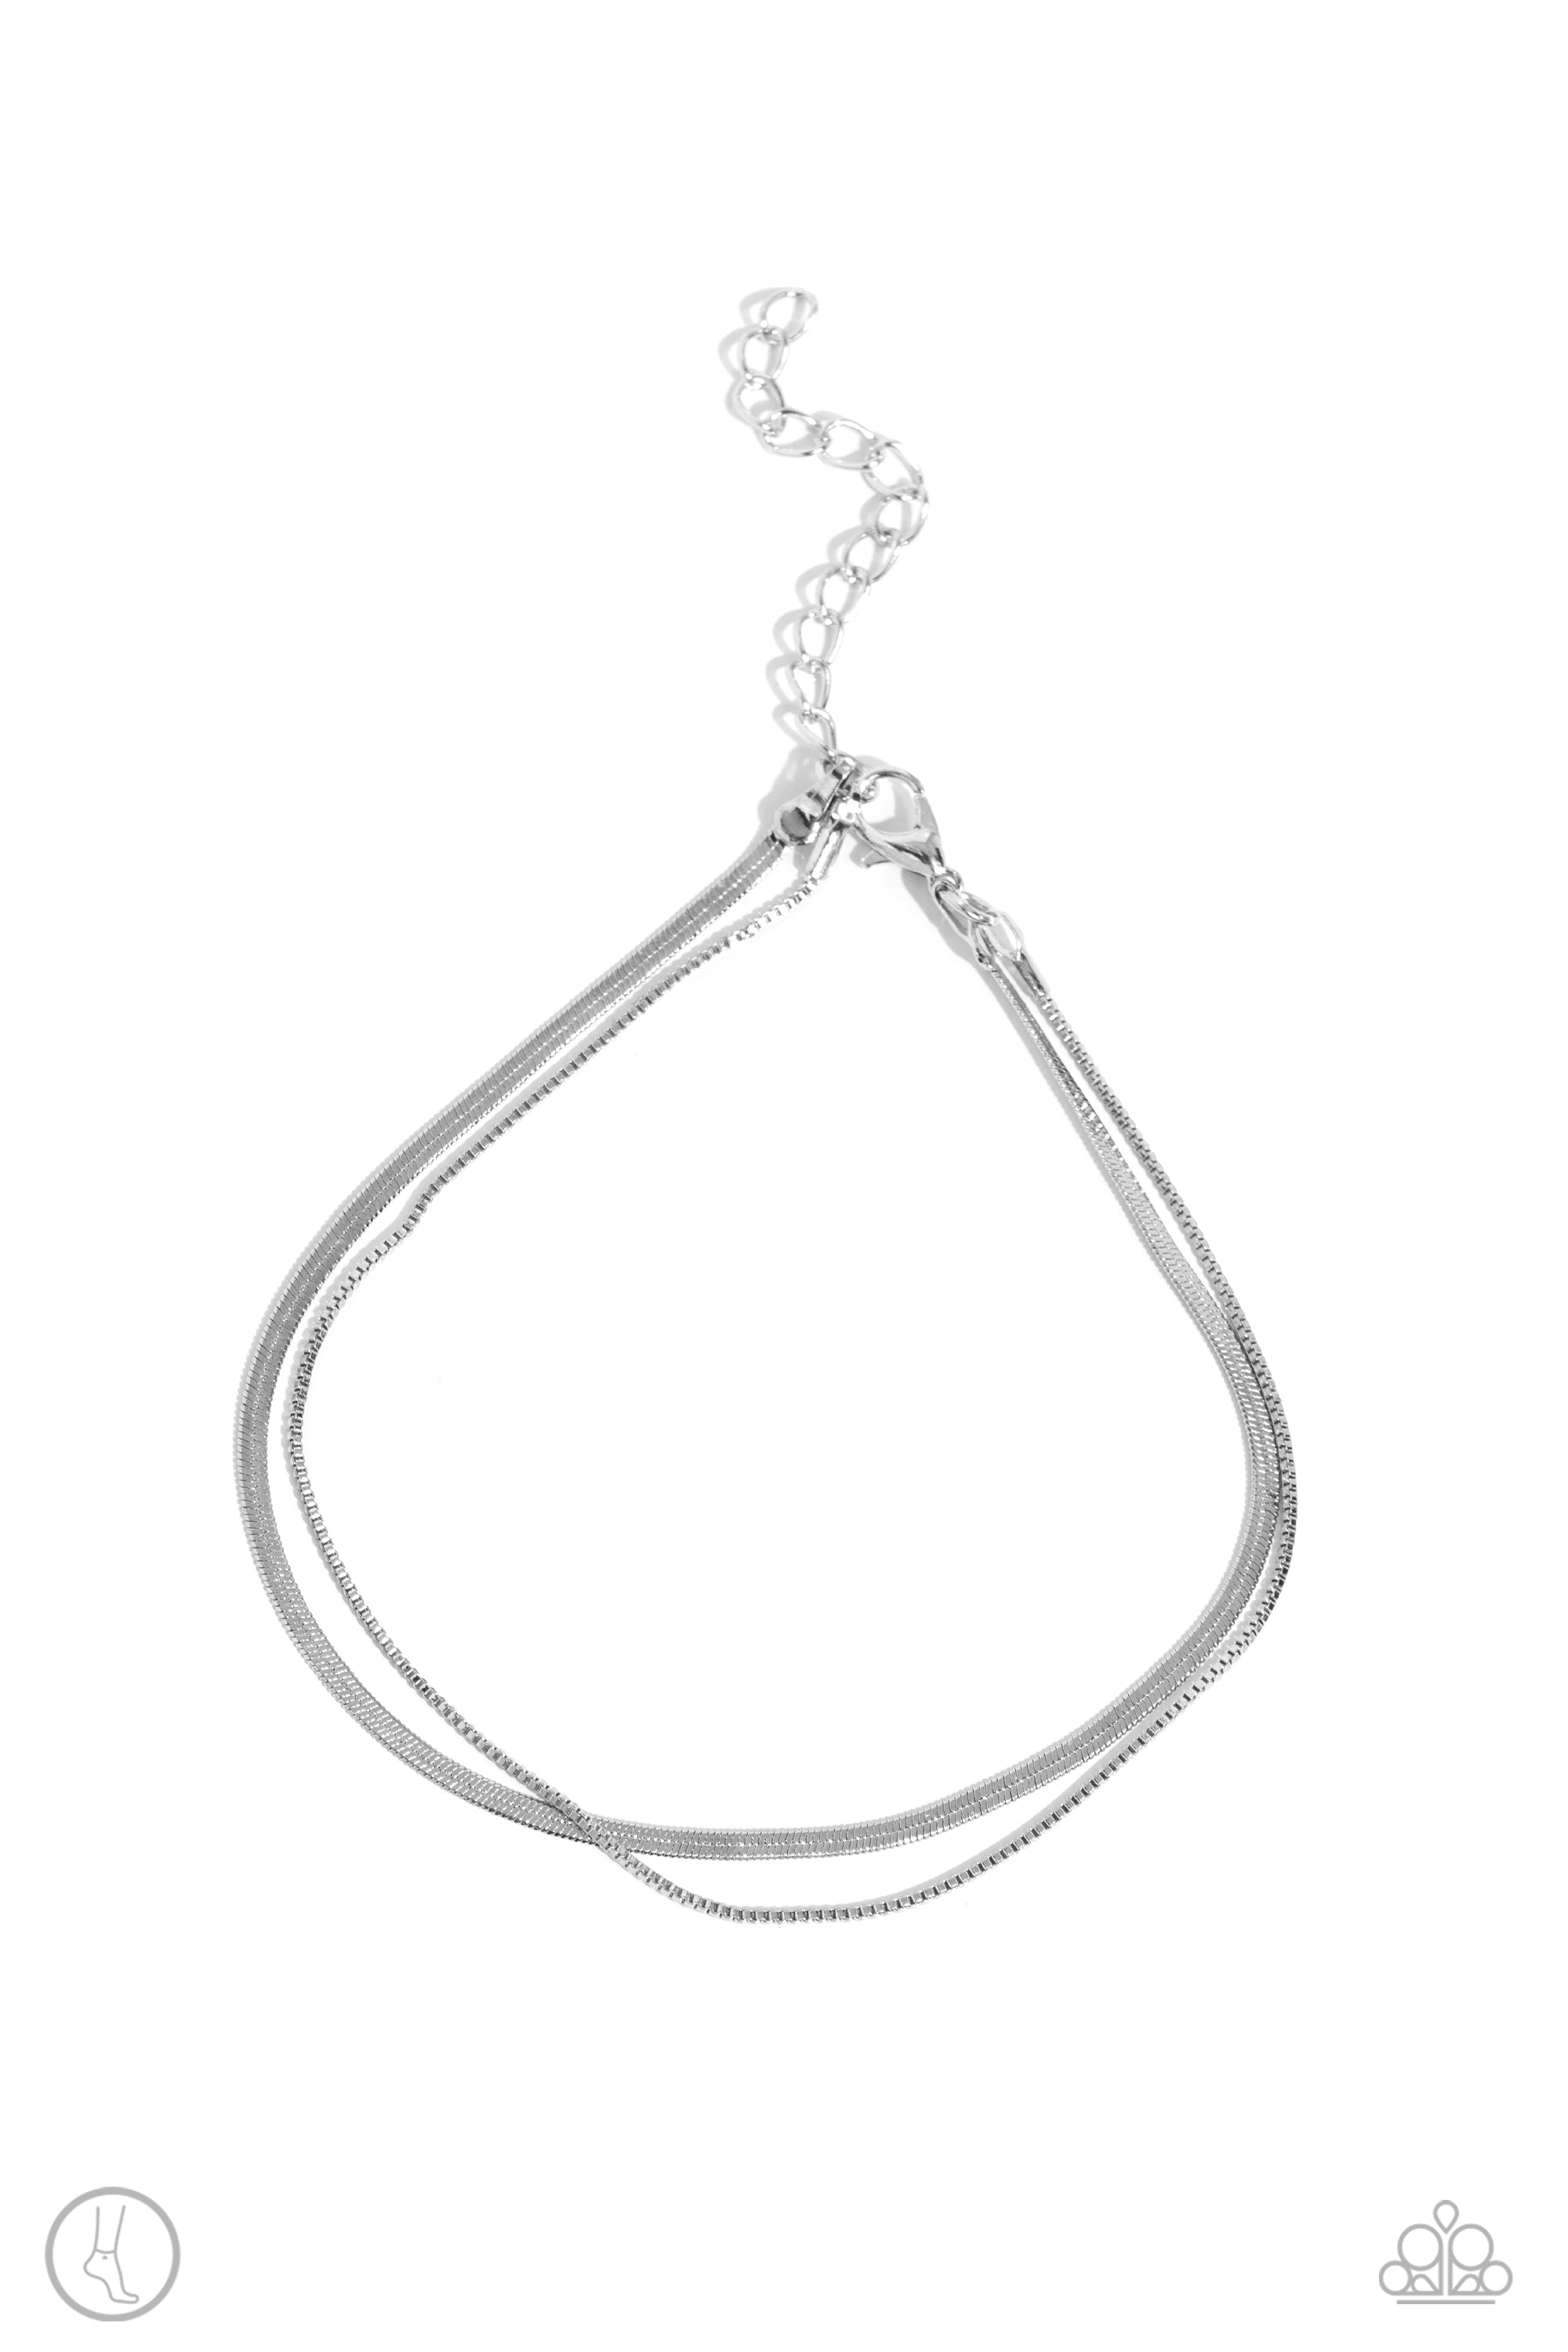 Glistening Gauge Silver Chain Anklet - Paparazzi Accessories- lightbox - CarasShop.com - $5 Jewelry by Cara Jewels